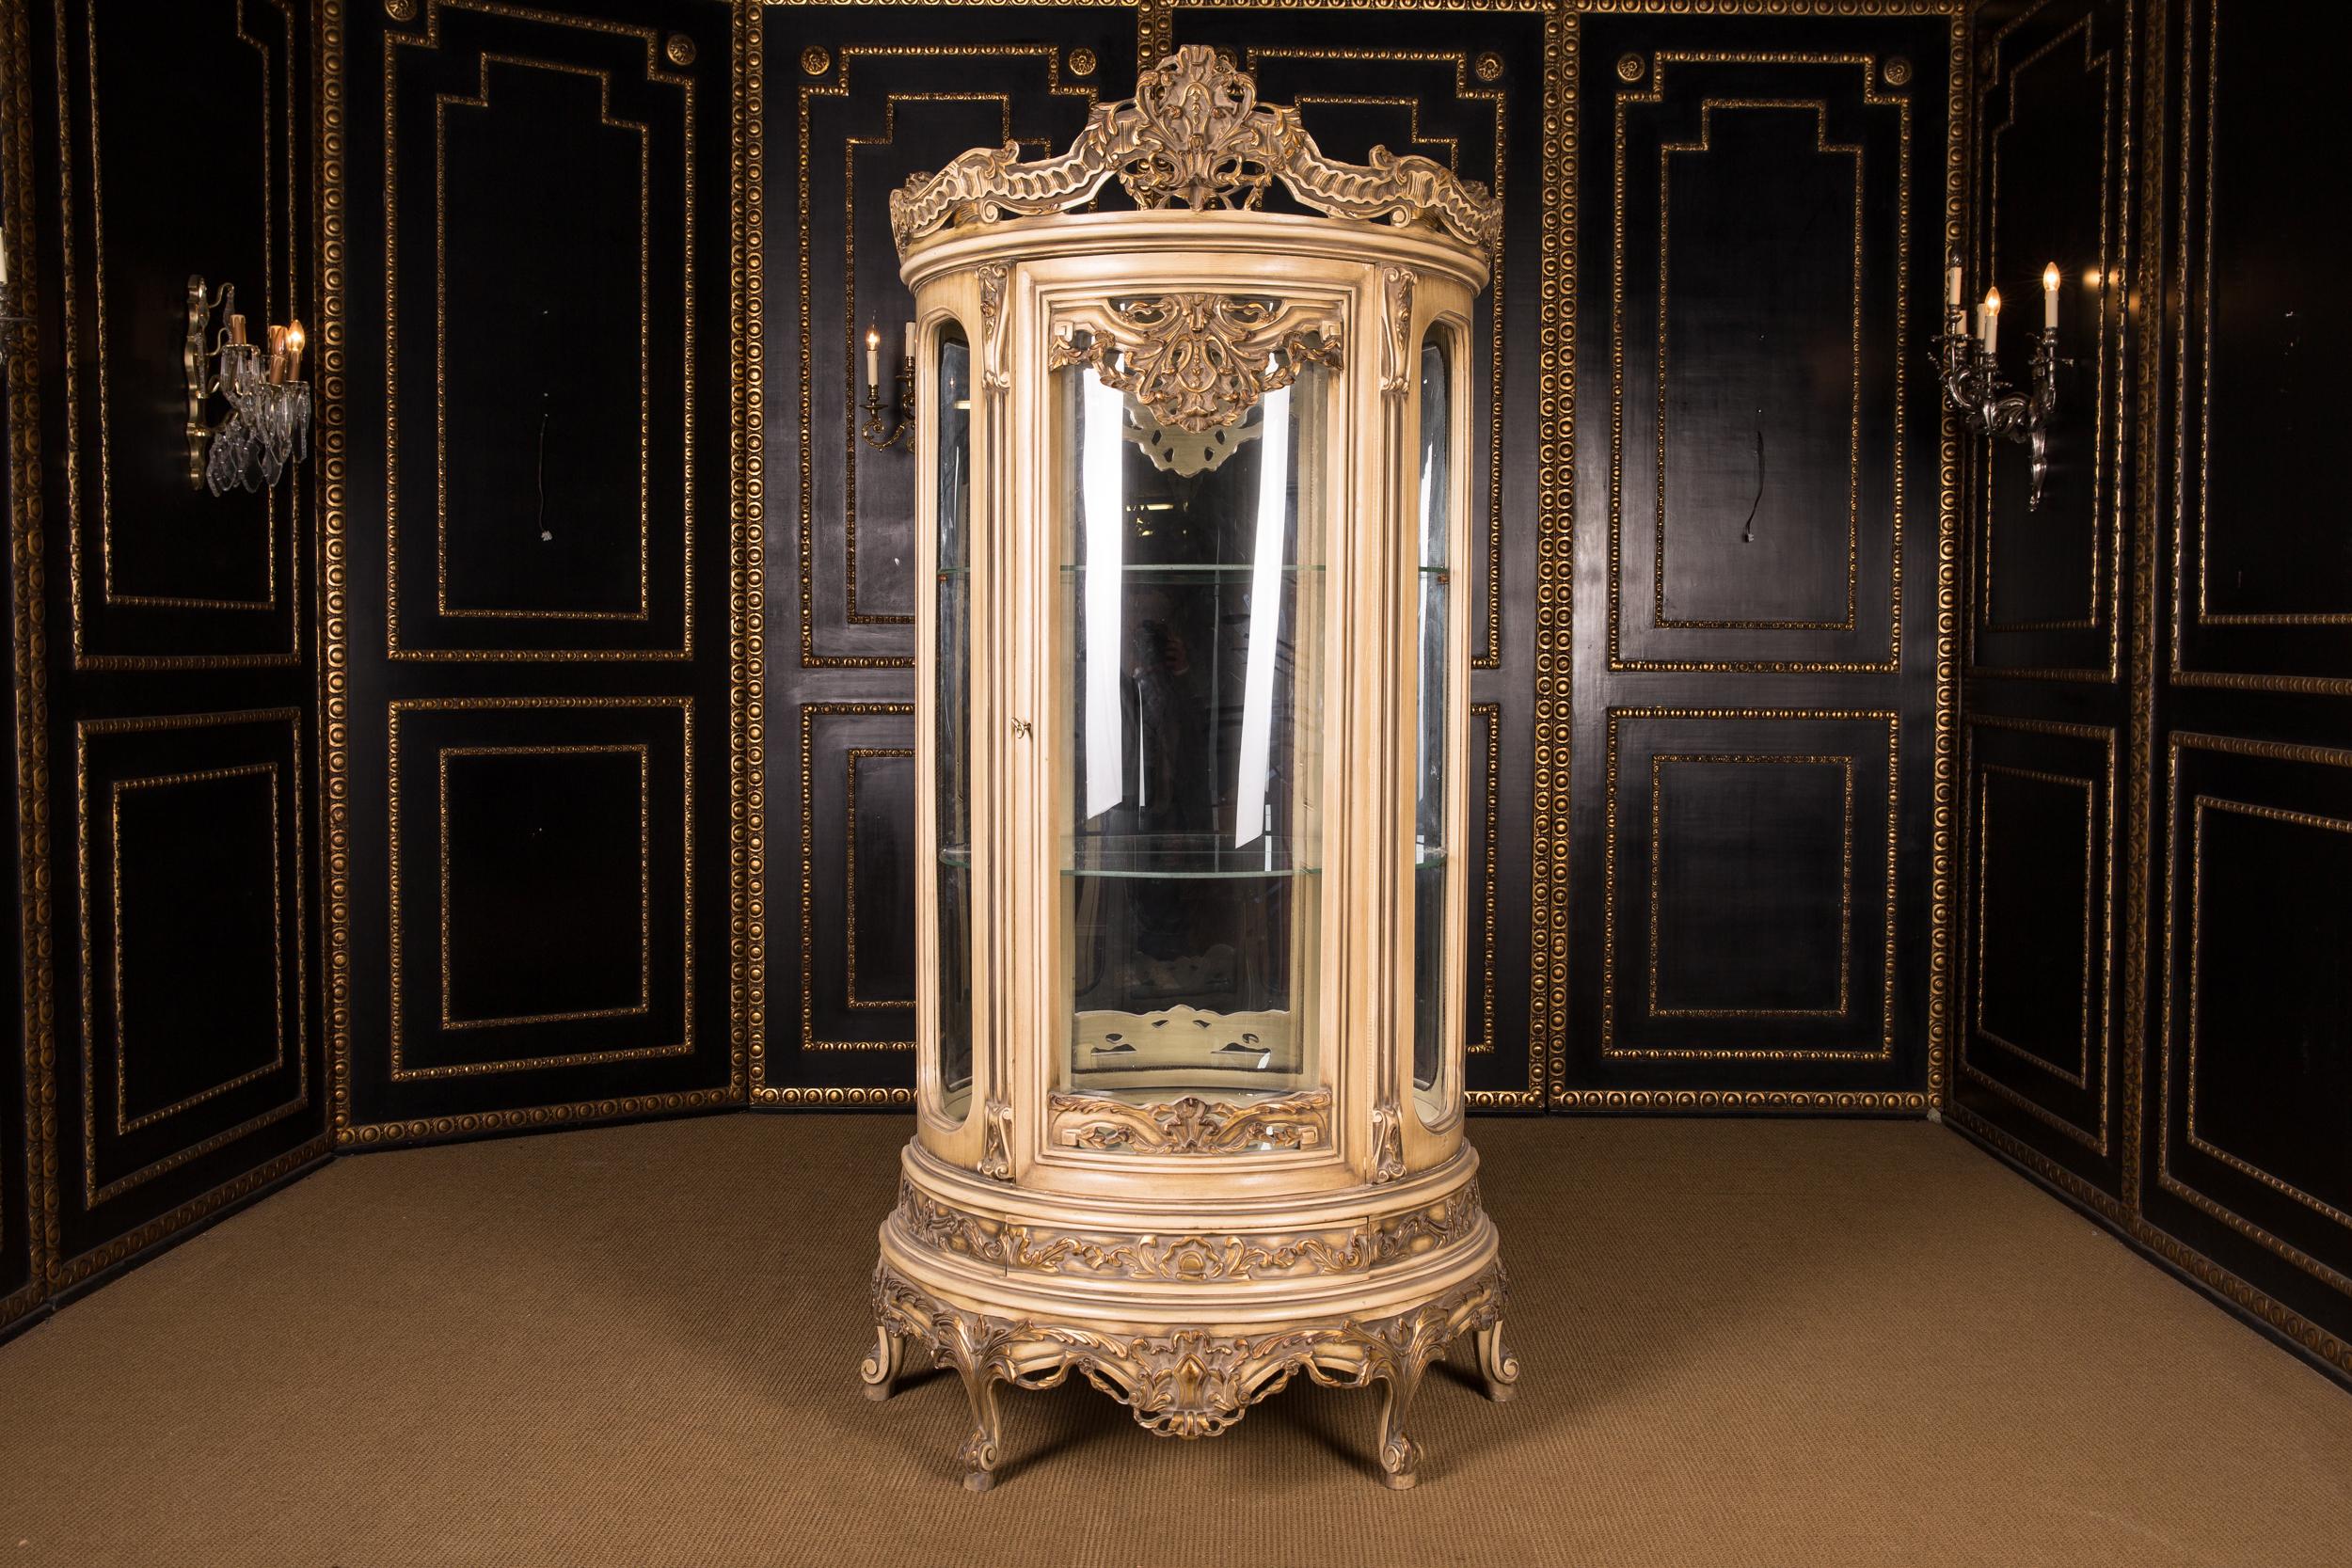 Massive, finely carved beechwood, colored and gilt gilded. High-rectangular, half-round and one-door cambered body, glazed from three sides. On curved feet one-door scalloped frame. Back wall mirrored three glass shelves. Carcass-shaped framing with